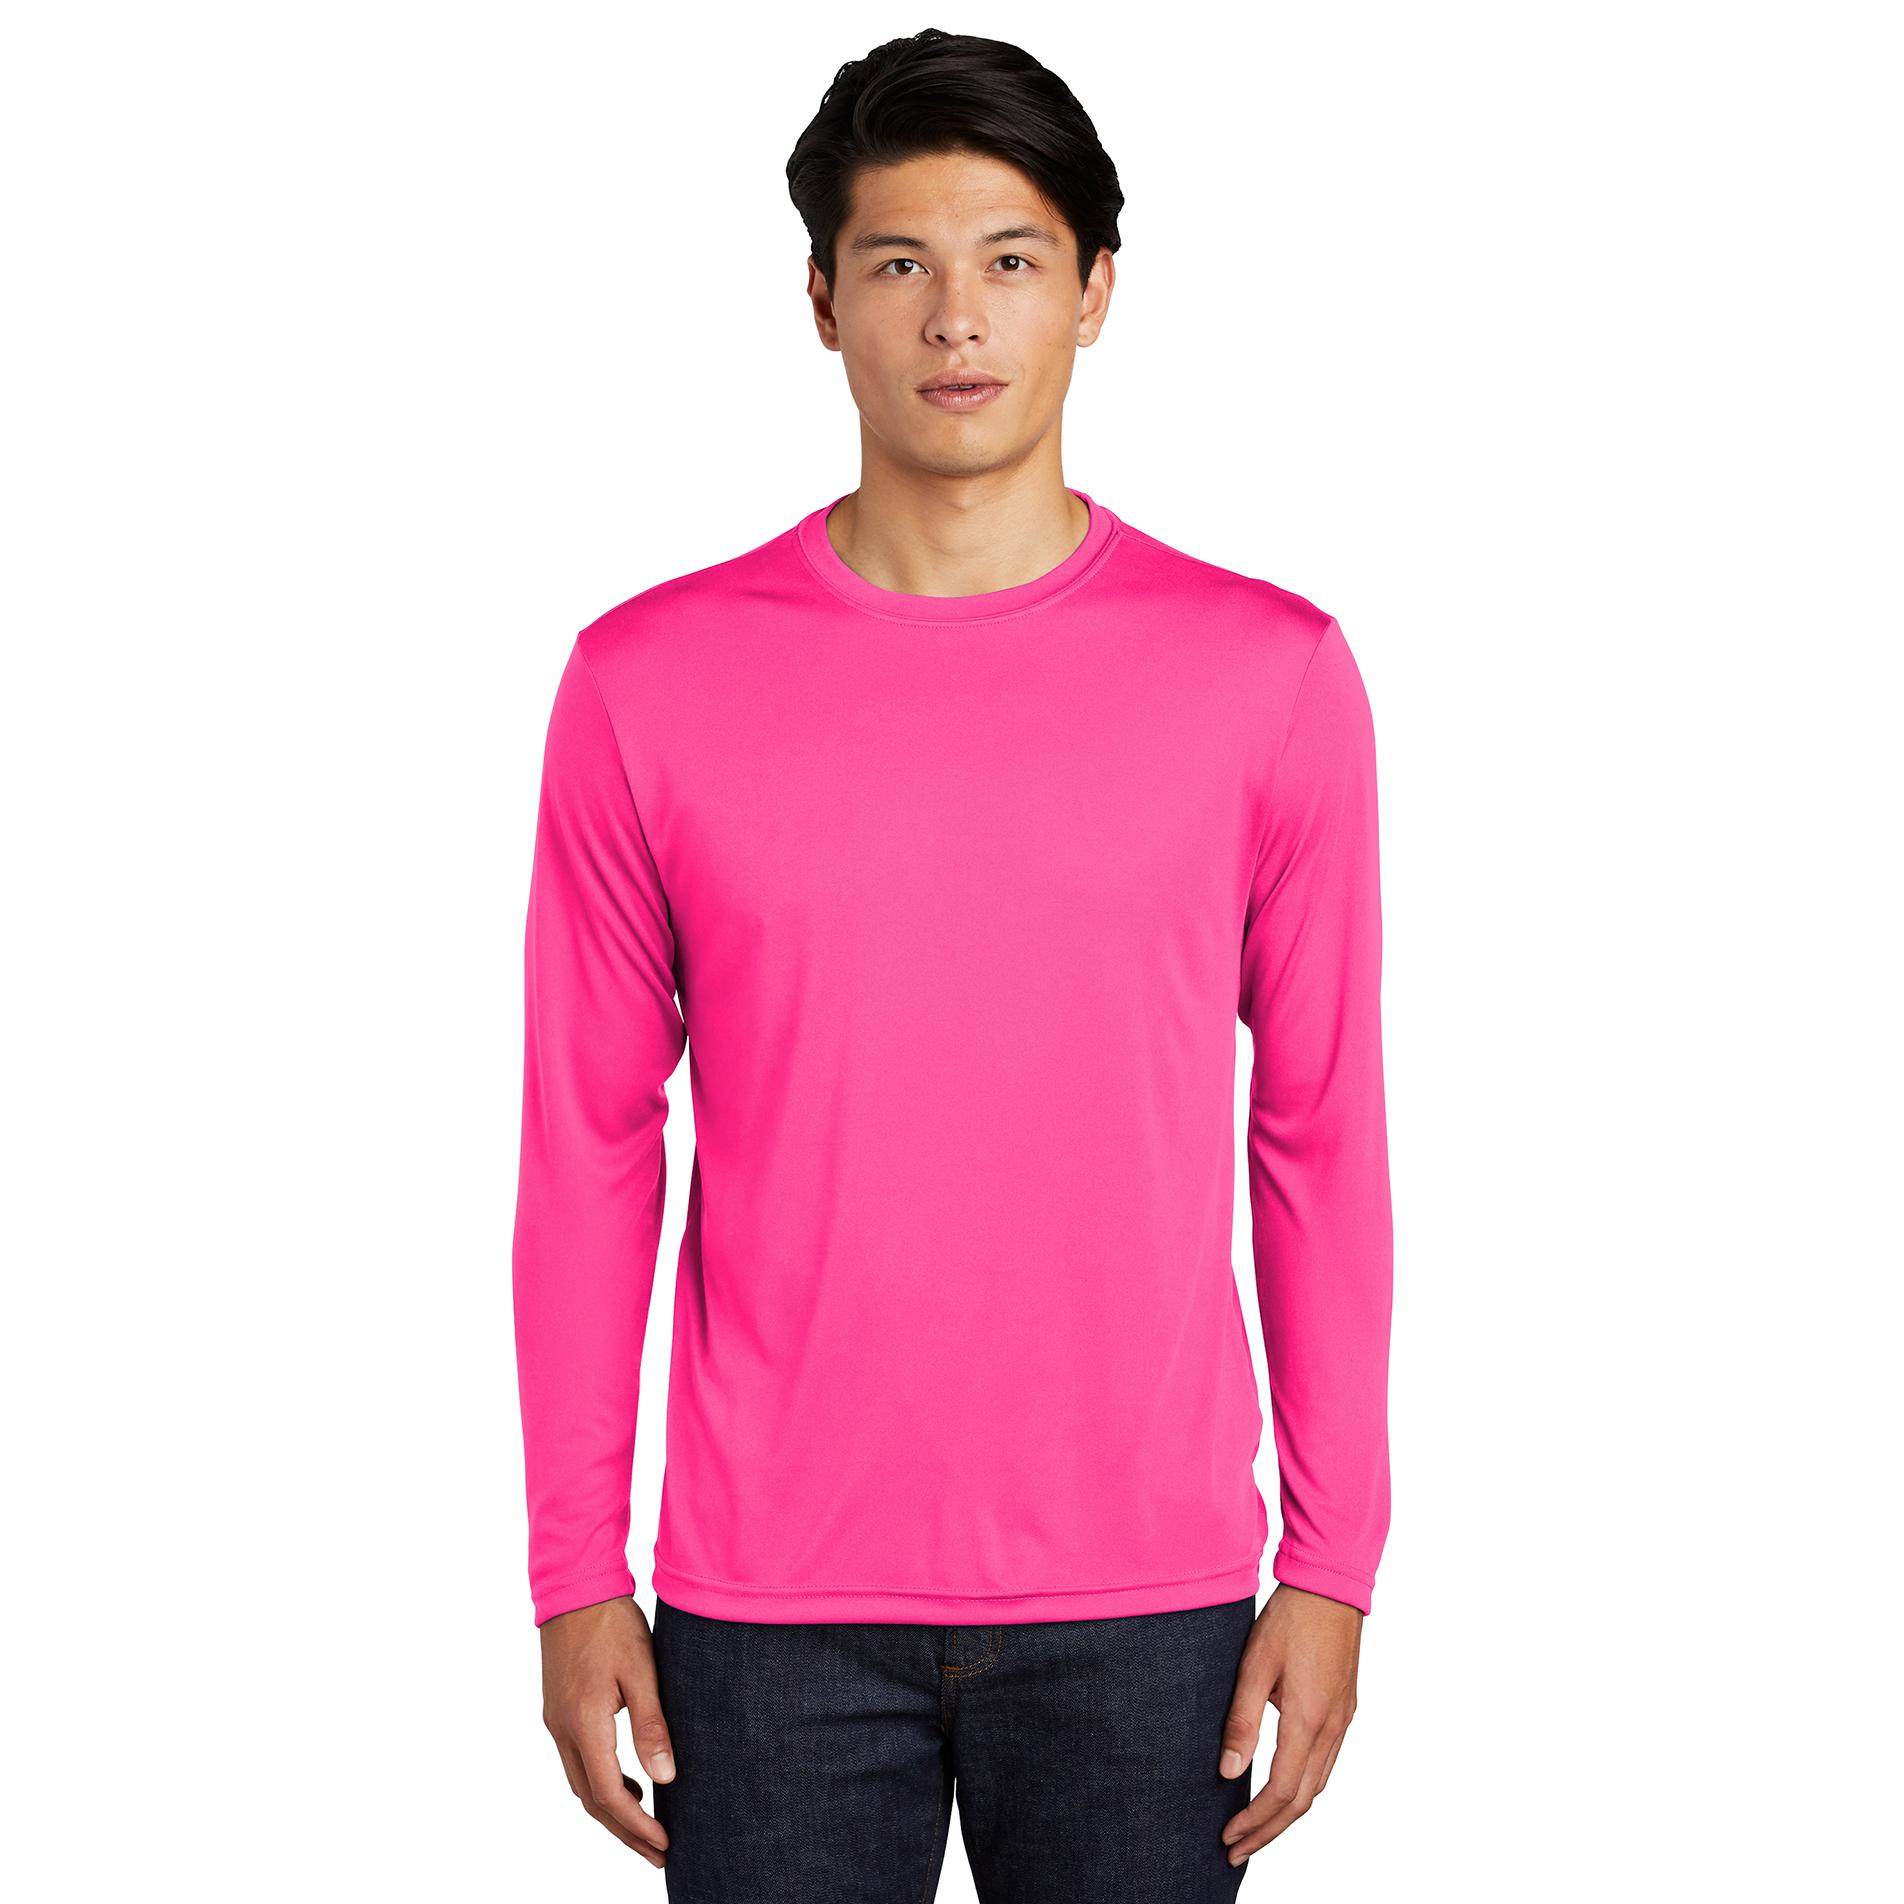 Long Source ST350LS | Neon PosiCharge Sport-Tek Pink Tee Sleeve Full - Competitor